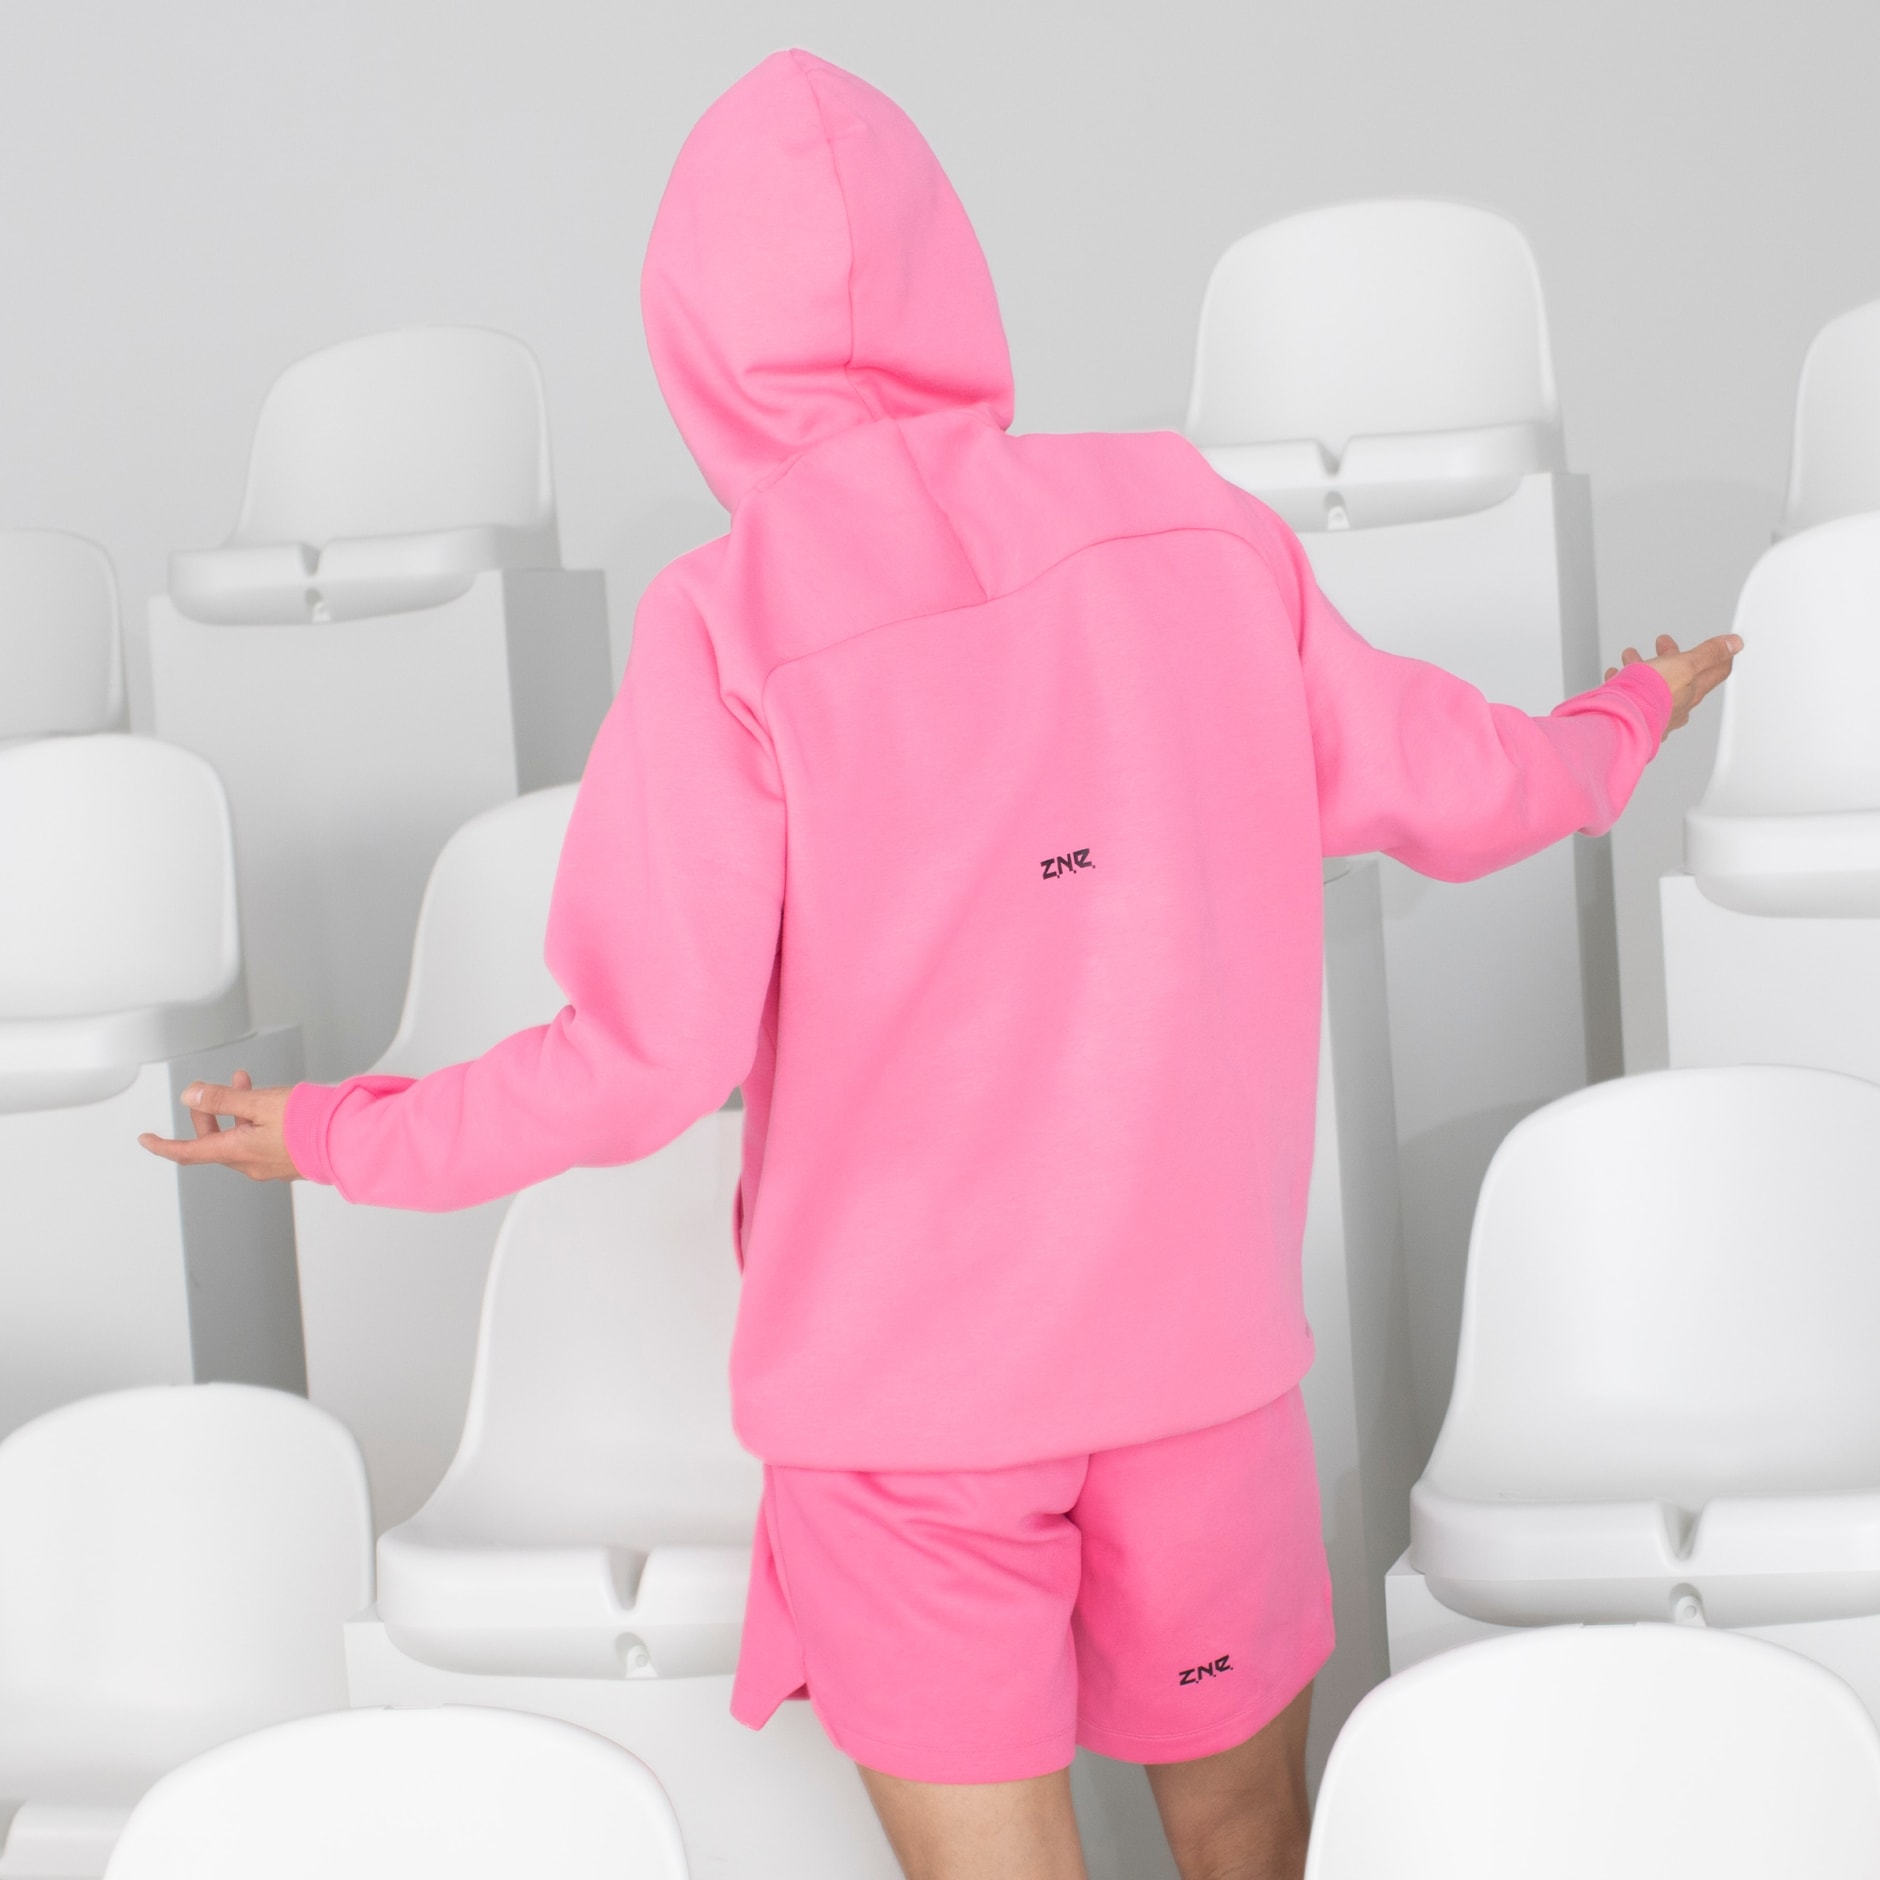 Clothing - New adidas Z.N.E. Premium Hoodie - Pink | adidas South Africa